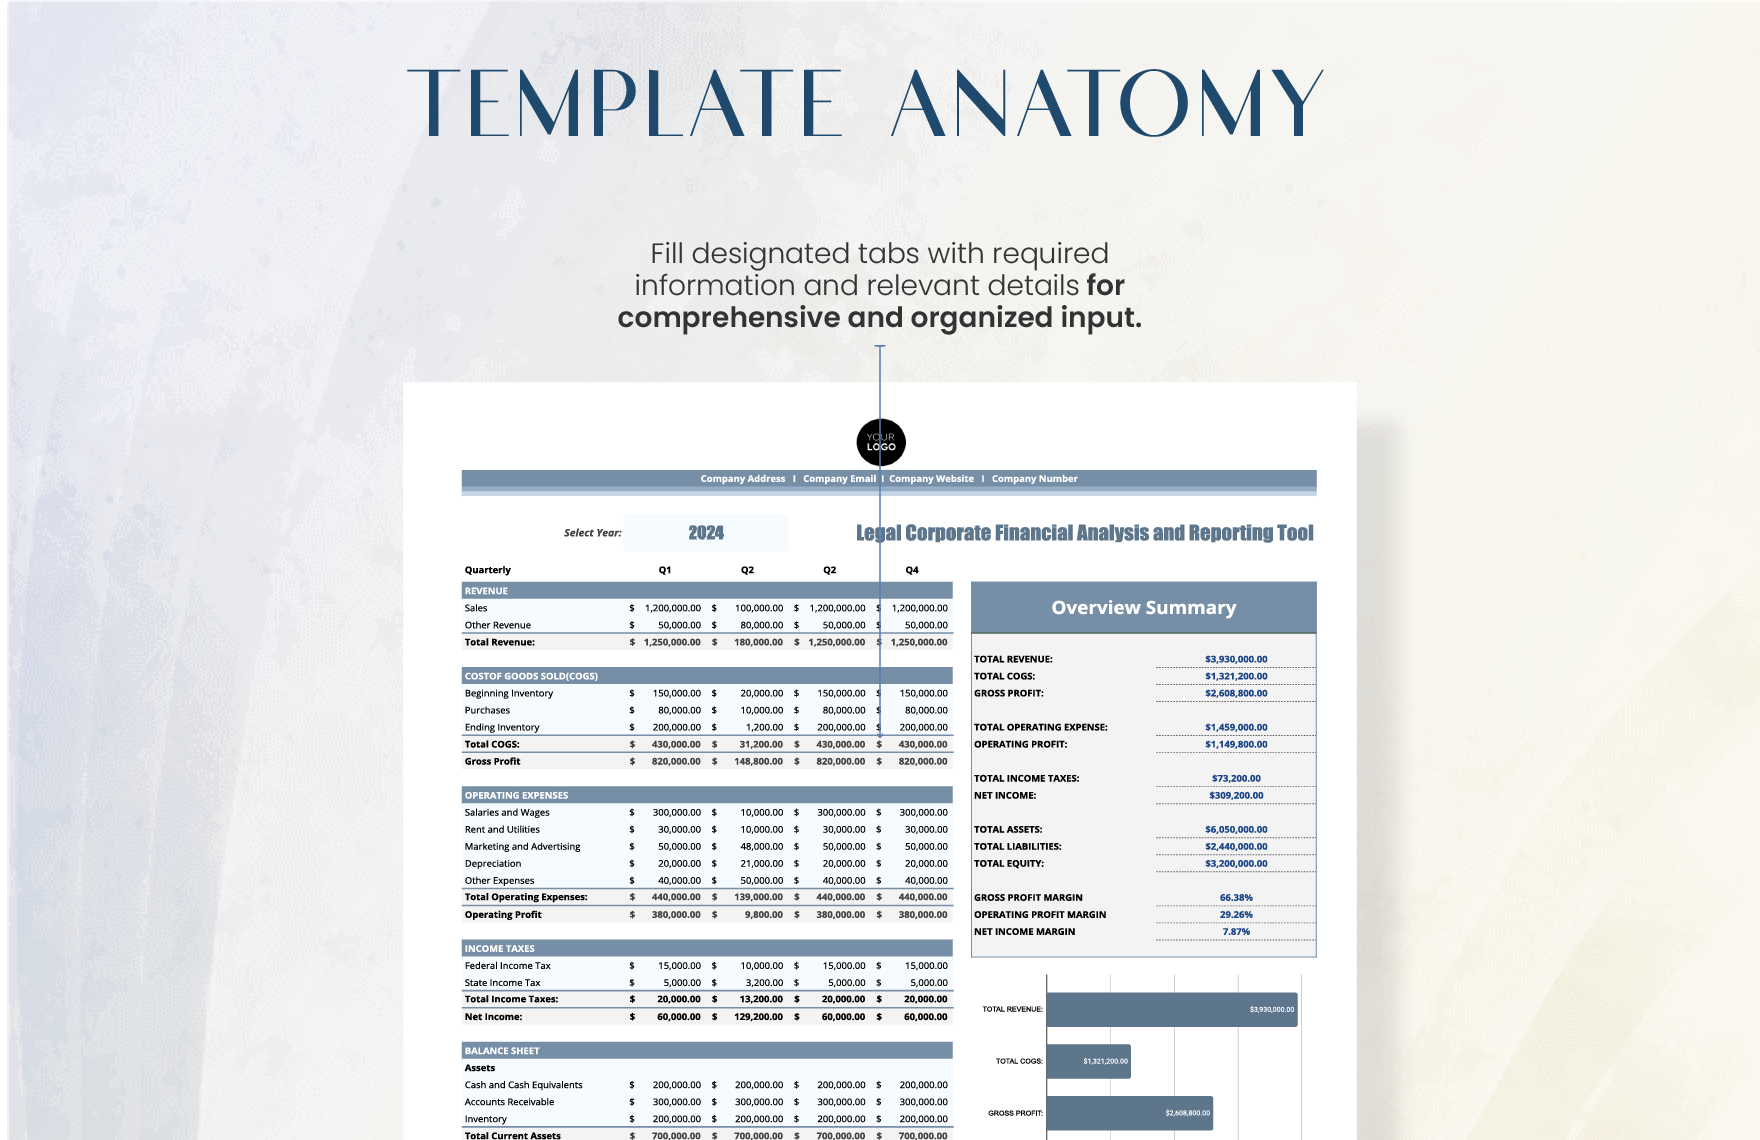 Legal Corporate Financial Analysis and Reporting Tool Template